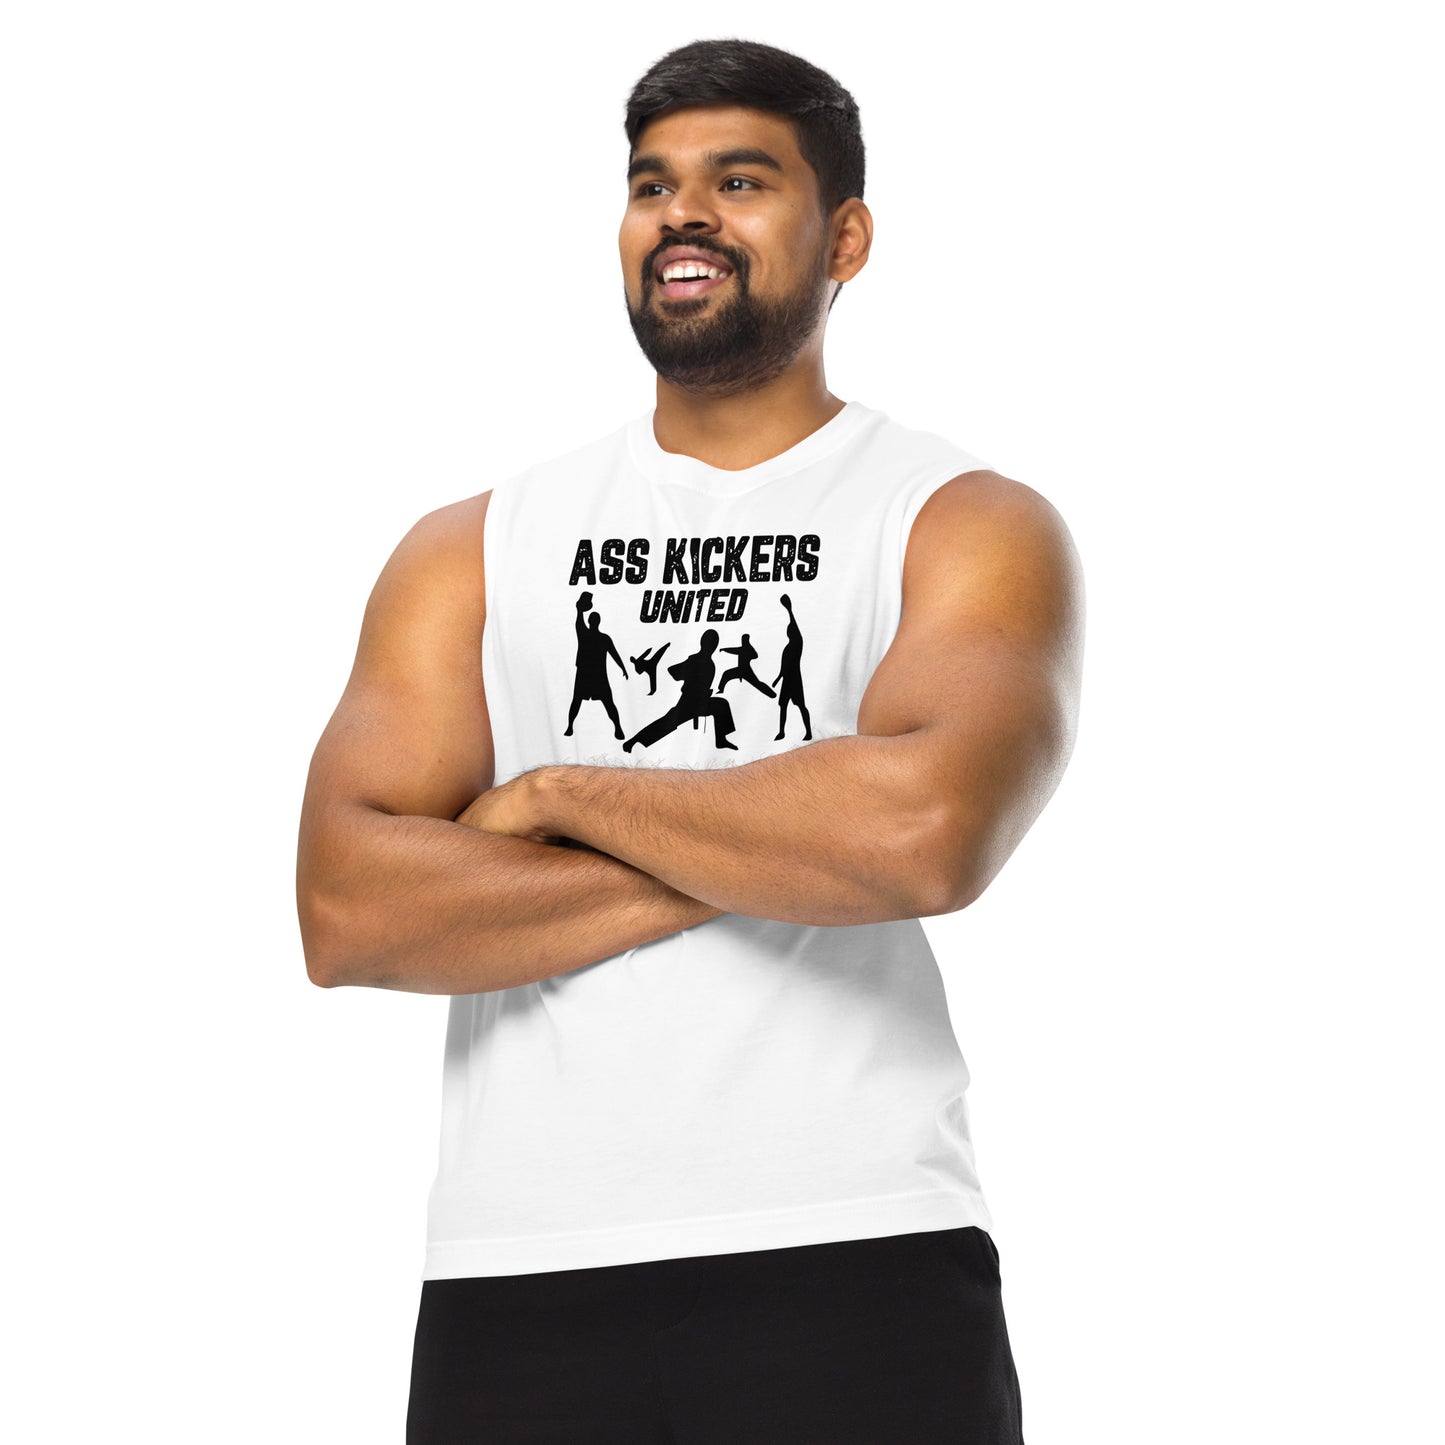 AssKickers United Muscle Shirt